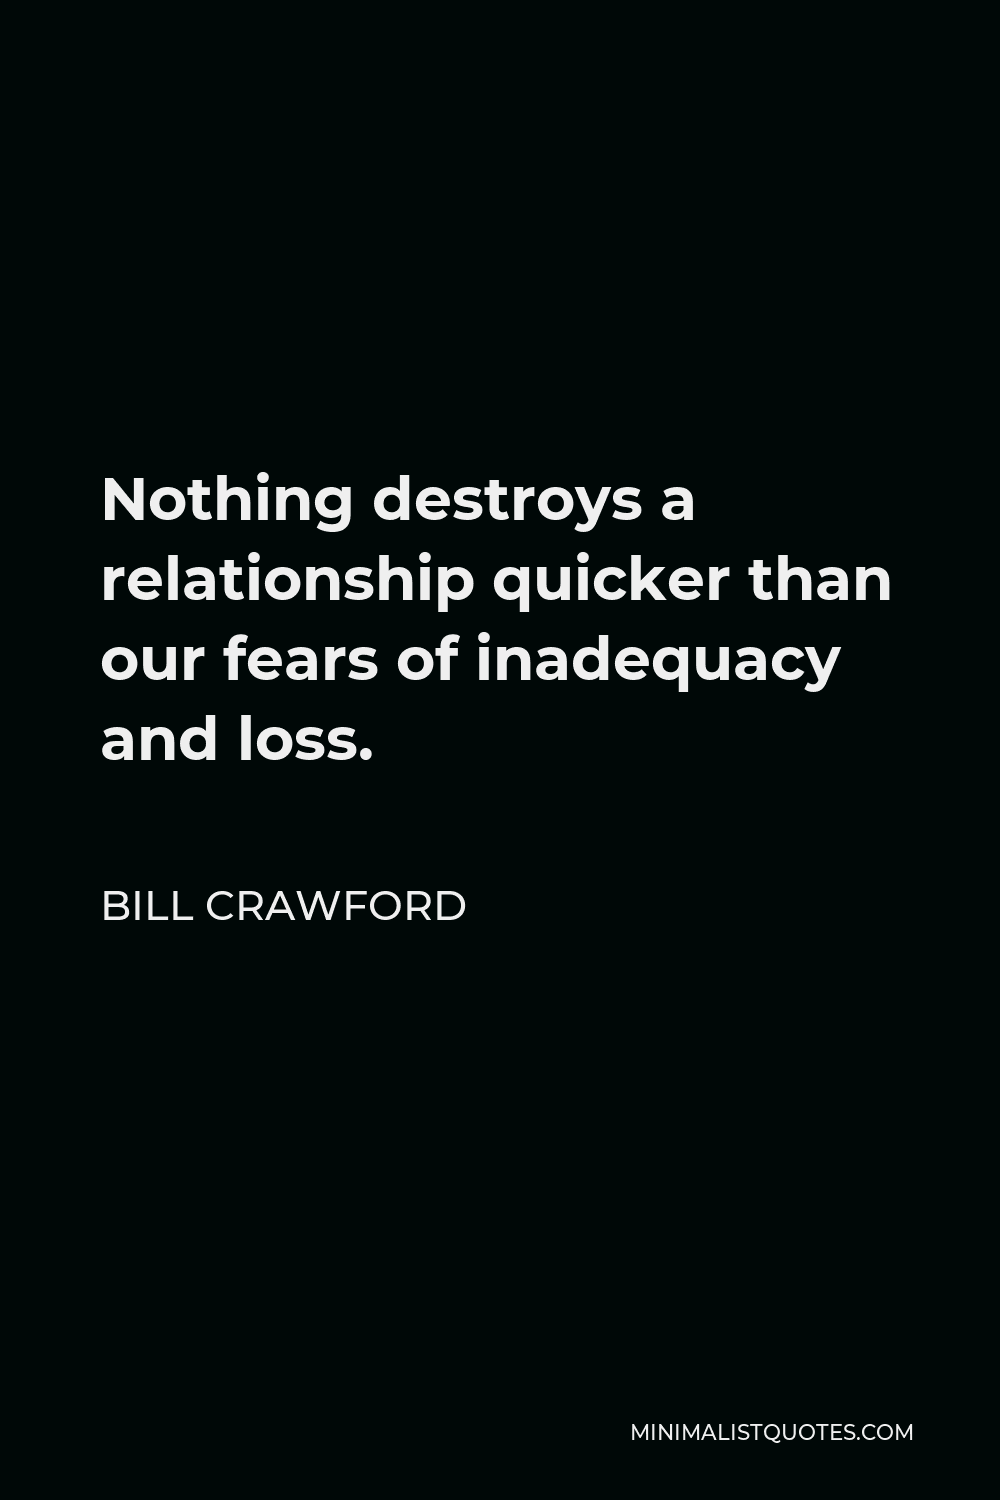 Bill Crawford Quote - Nothing destroys a relationship quicker than our fears of inadequacy and loss.